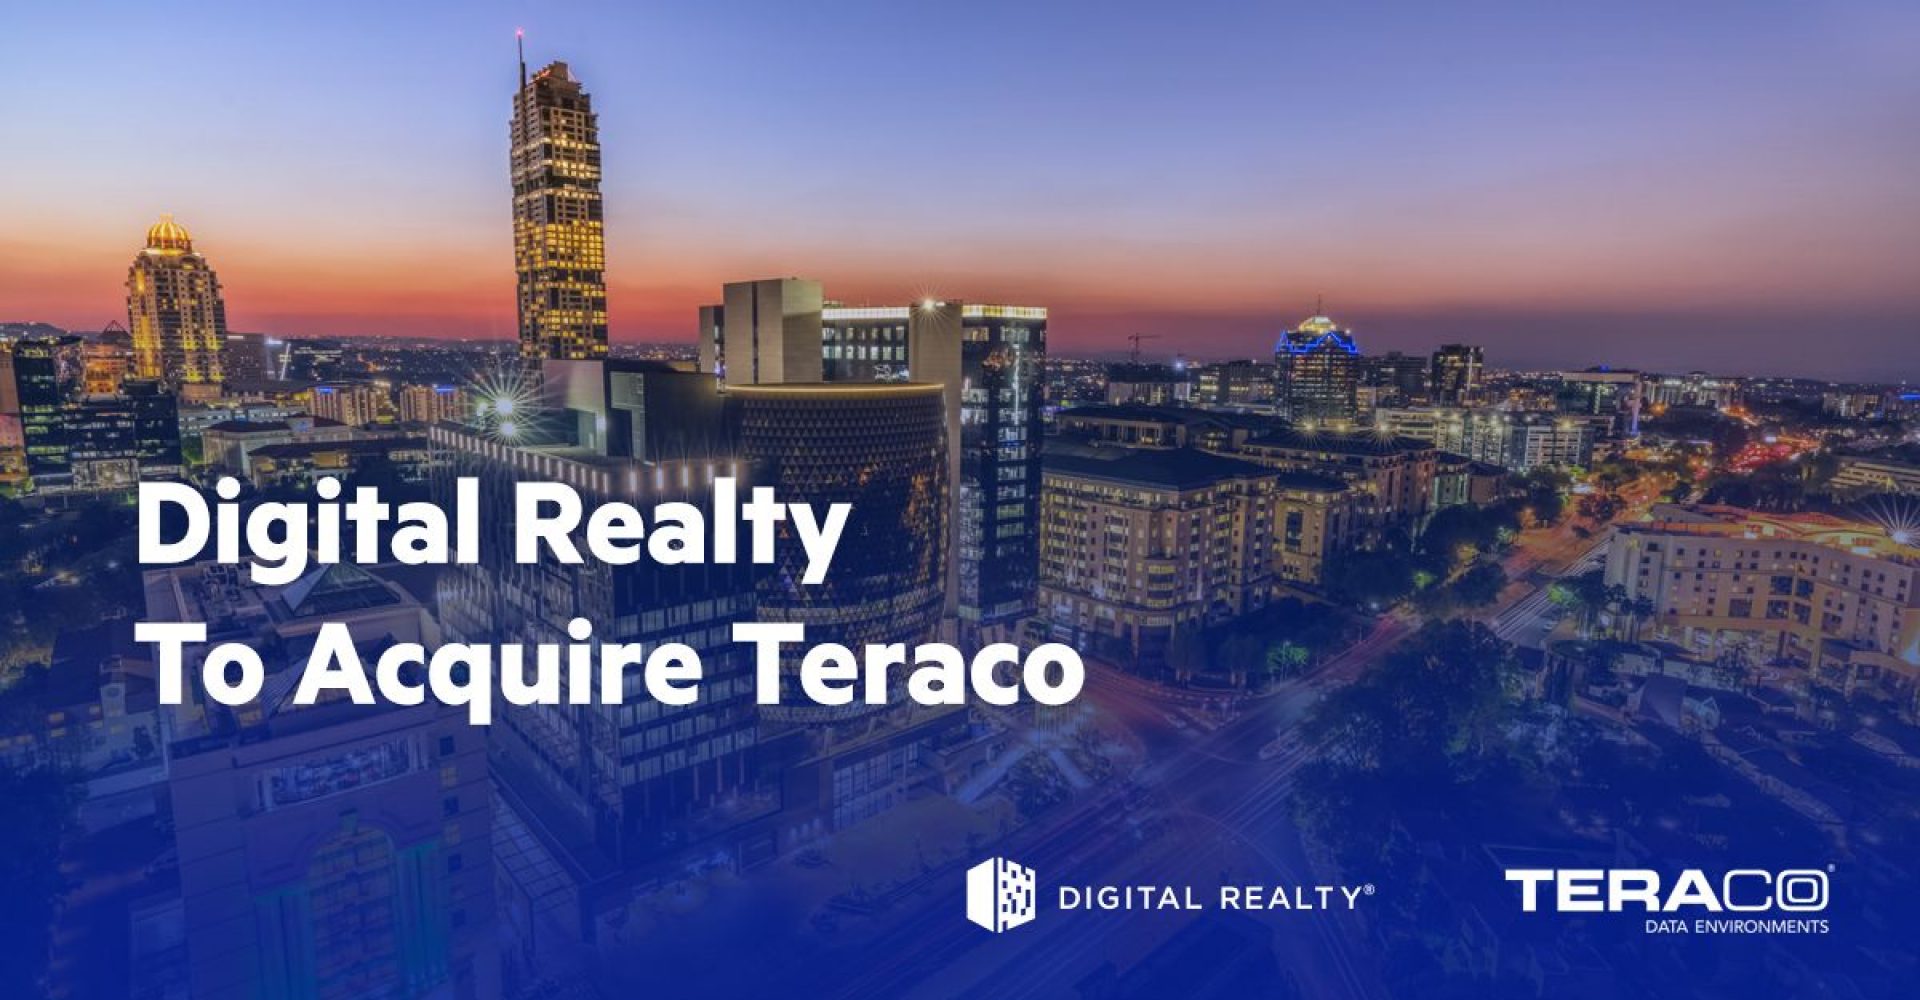 Digital Realty, Ascenty Investor, Acquires Teraco, Africa’s Leading Data Center Company